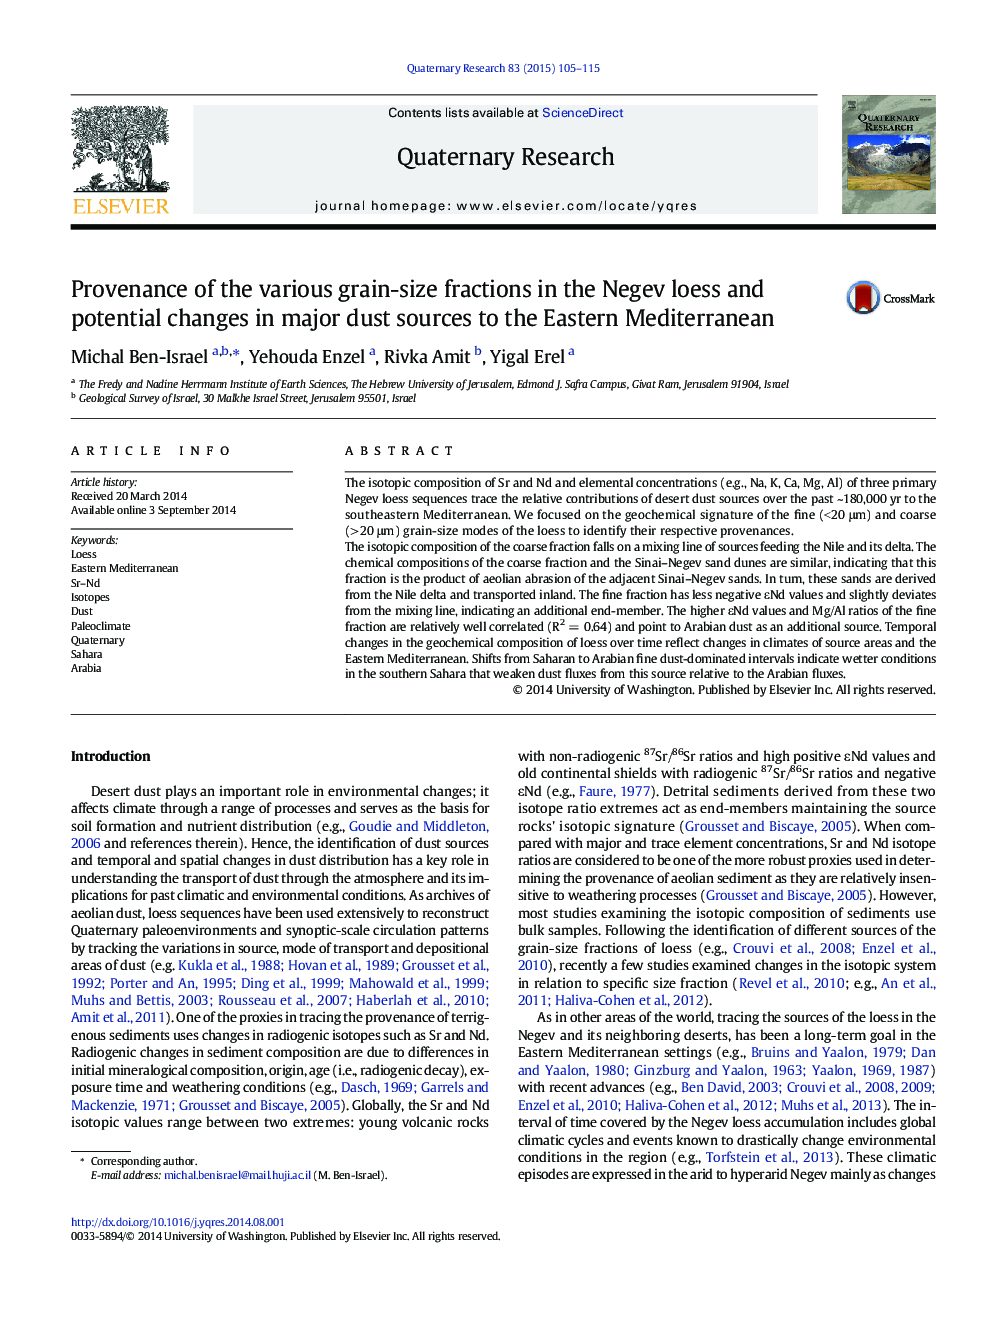 Provenance of the various grain-size fractions in the Negev loess and potential changes in major dust sources to the Eastern Mediterranean